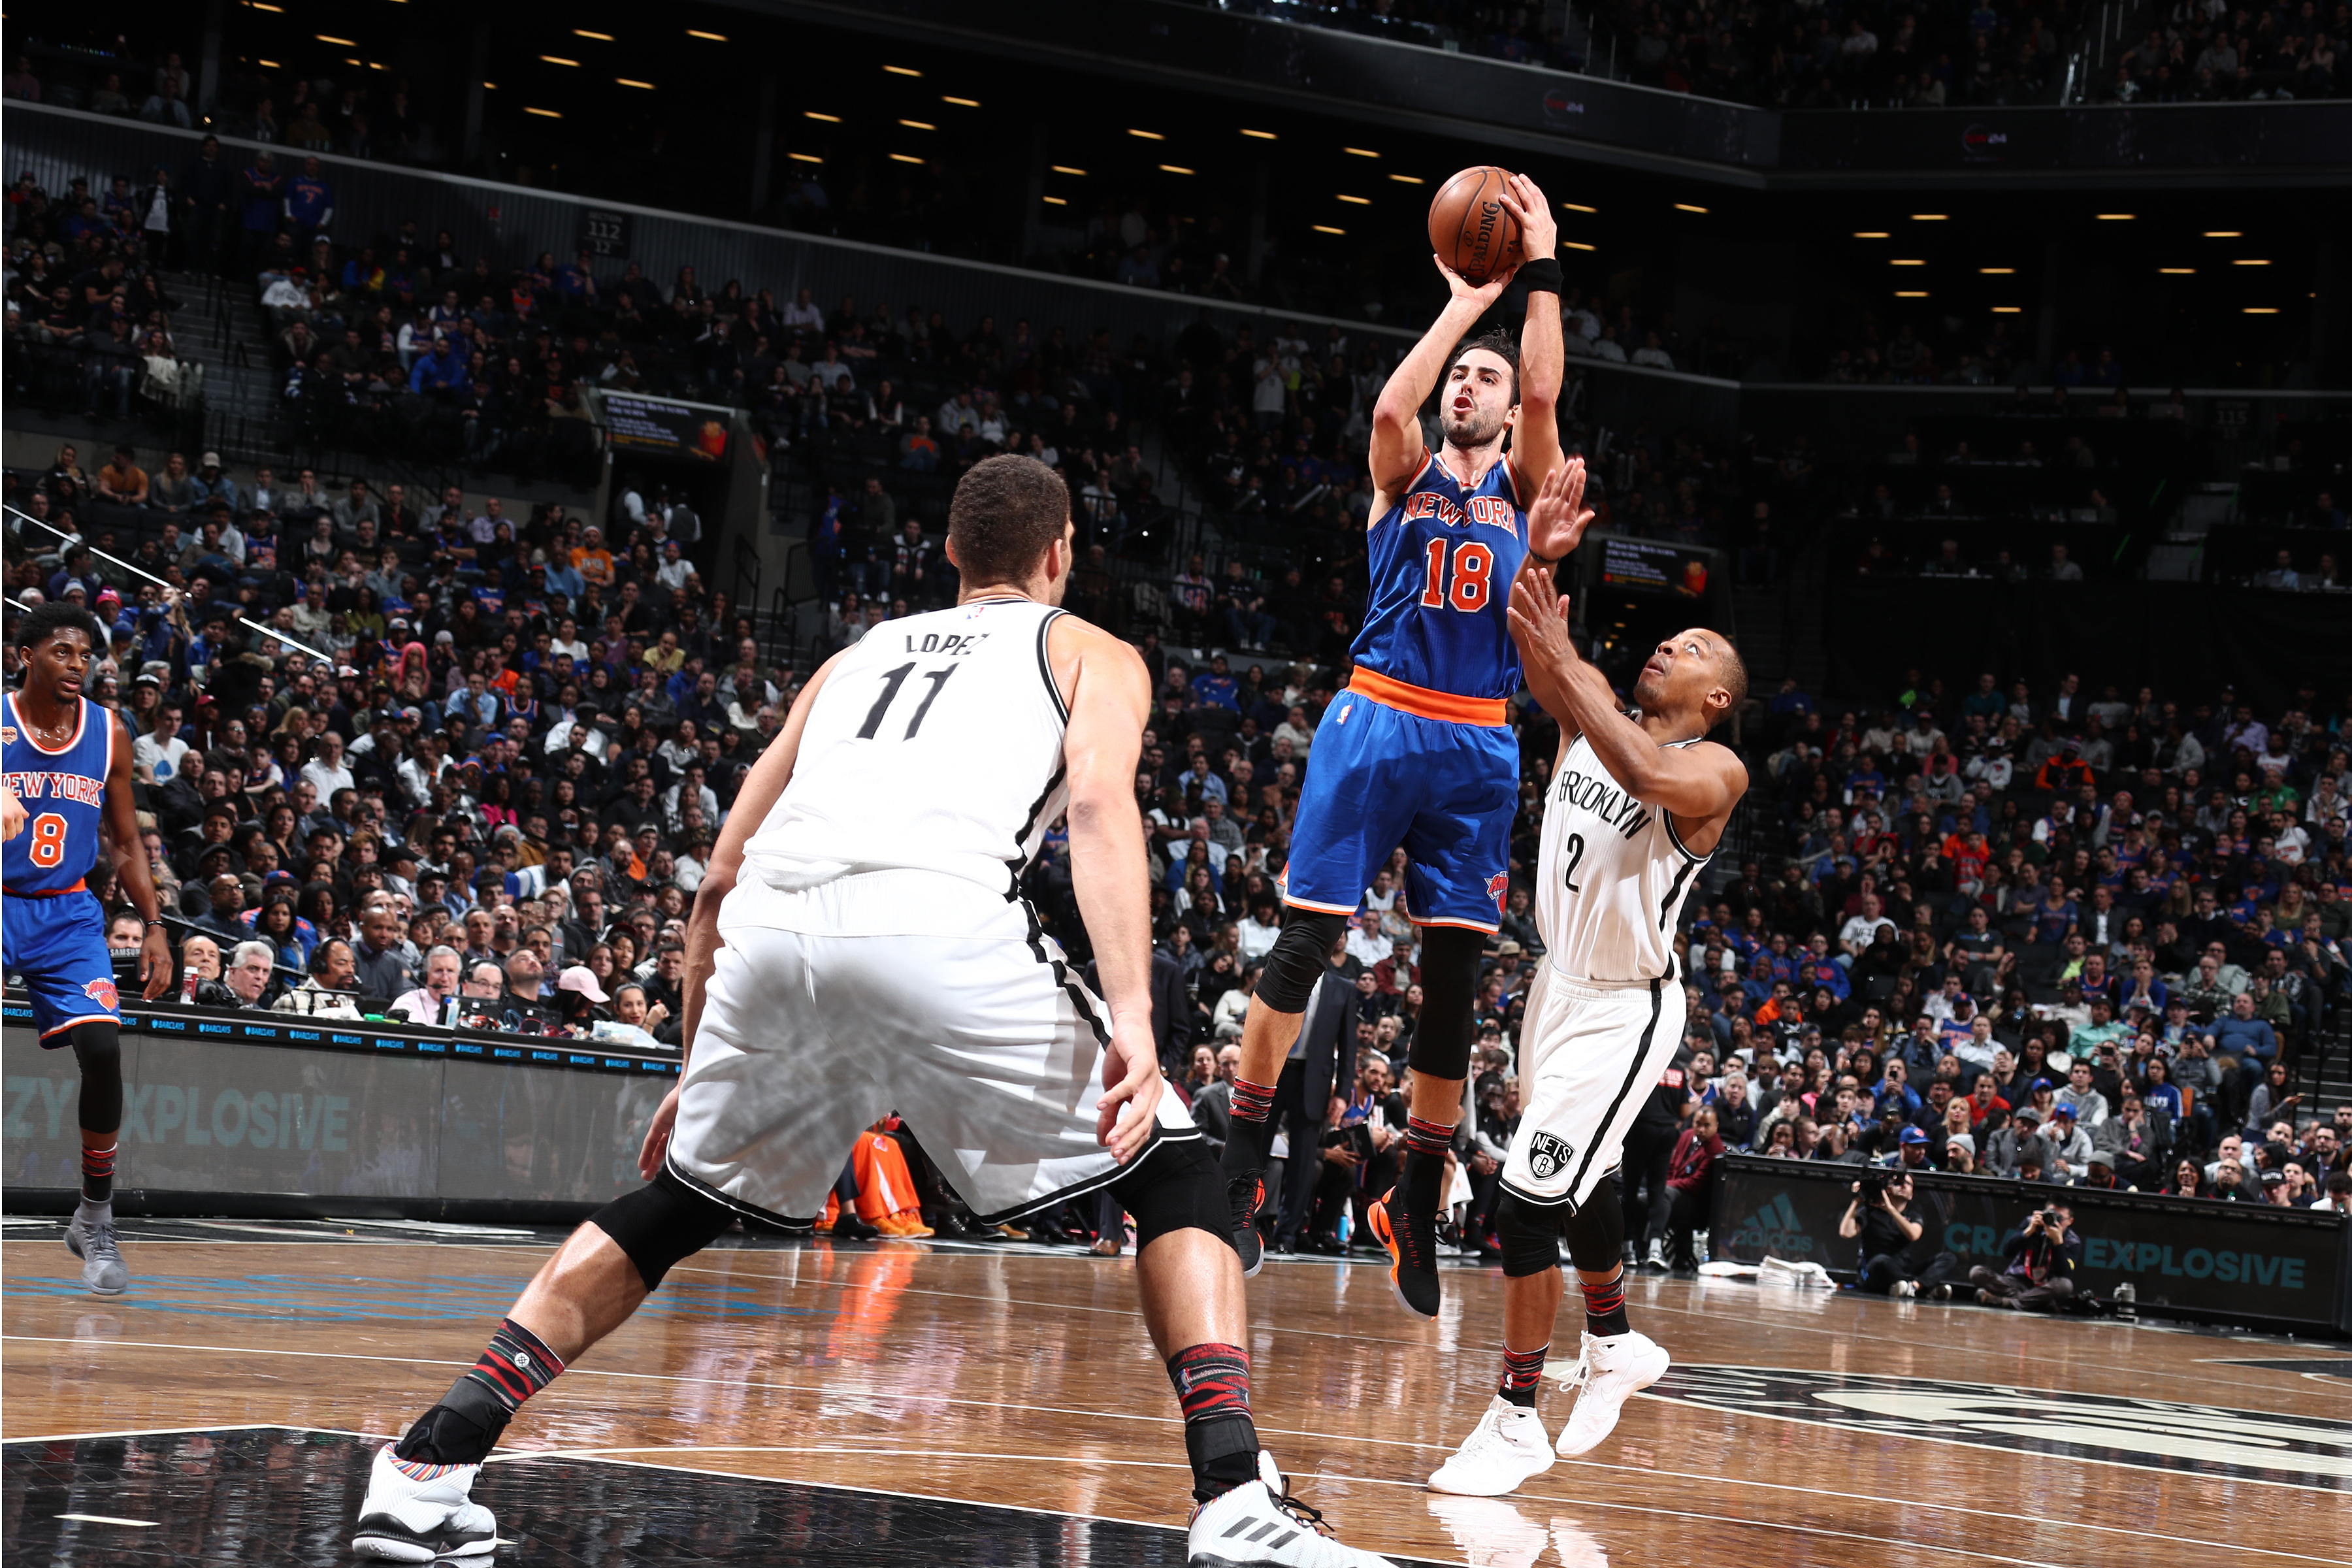 BROOKLYN, NY - FEBRUARY 1: Sasha Vujacic #18 of the New York Knicks shoots the ball against the Brooklyn Nets during the game on February 1, 2017 at Barclays Center in Brooklyn, New York. NOTE TO USER: User expressly acknowledges and agrees that, by downloading and or using this Photograph, user is consenting to the terms and conditions of the Getty Images License Agreement. Mandatory Copyright Notice: Copyright 2017 NBAE (Photo by Nathaniel S. Butler/NBAE via Getty Images)